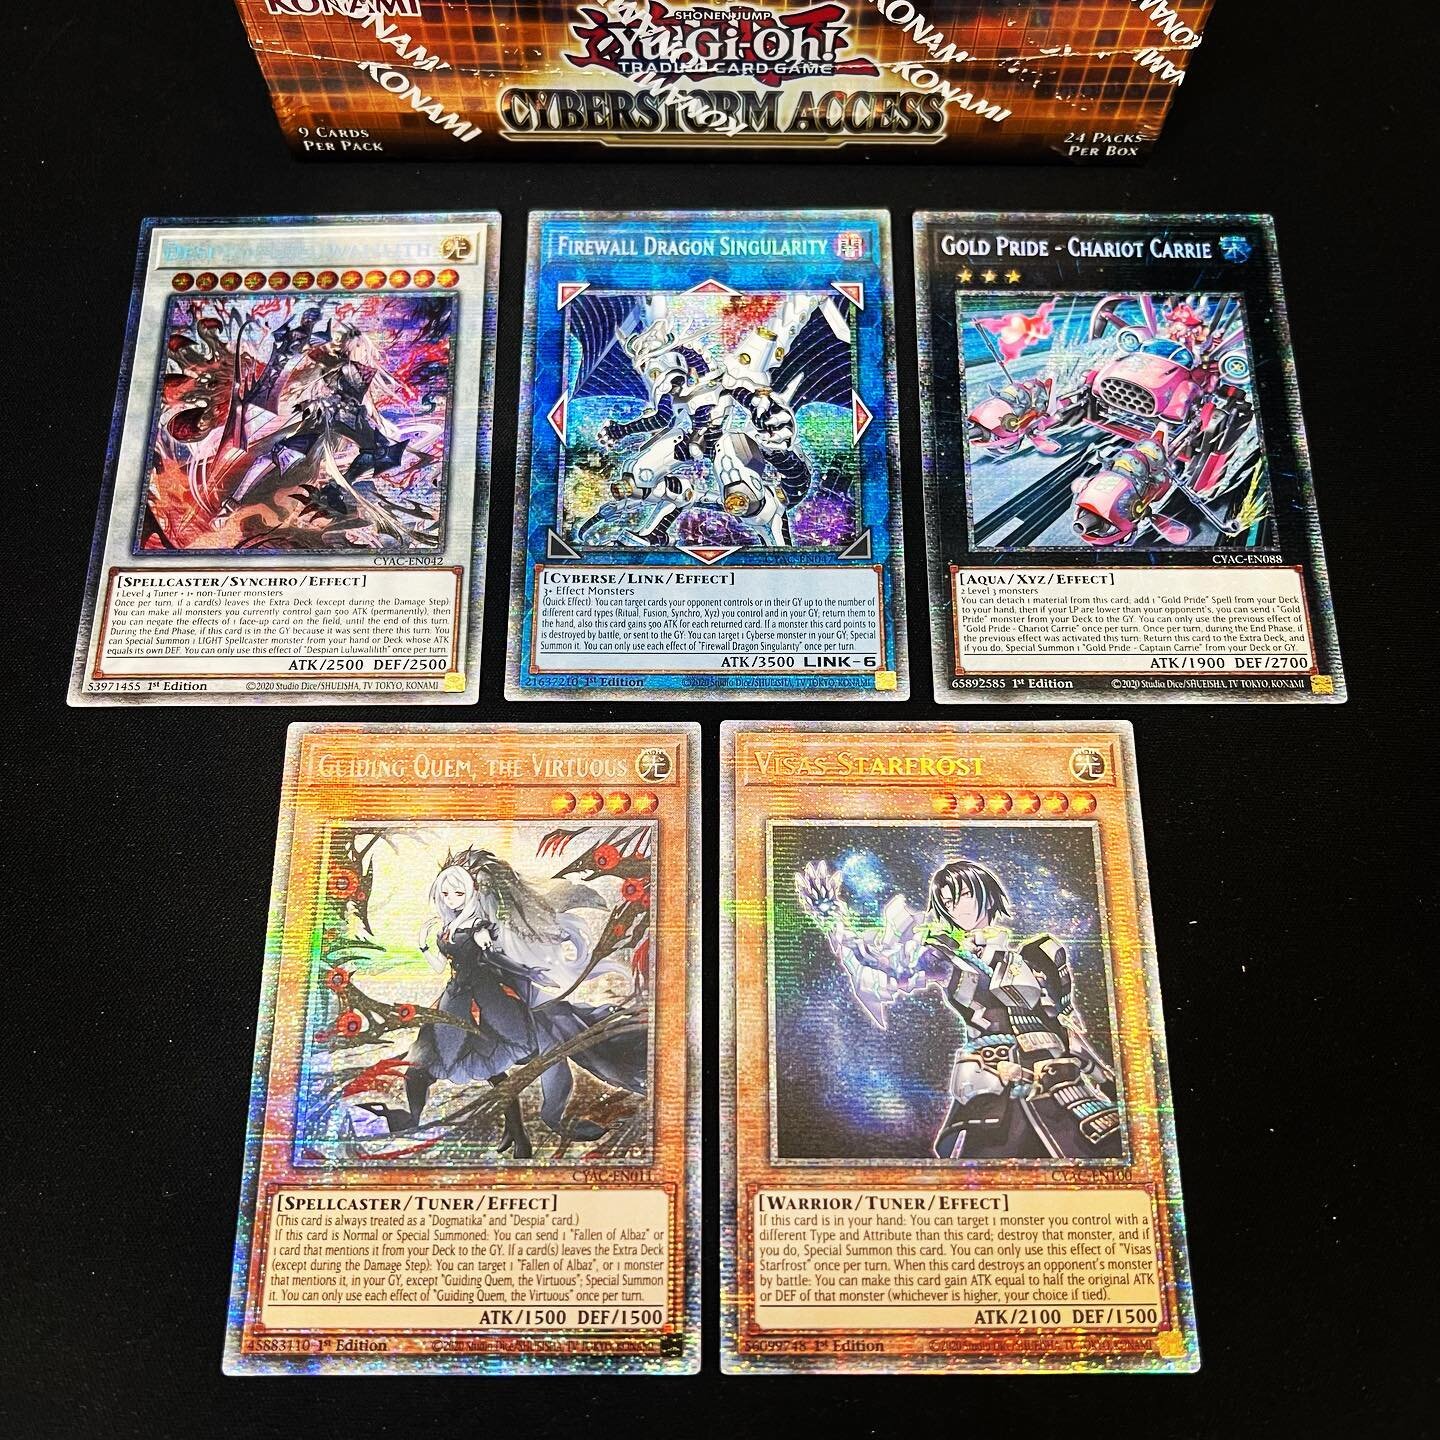 Singles for Cyberstorm Access is now available!

Find all 5 Starlight Rares and more in the latest Yugioh set, including the newly introduced Mannadium and Nemleria archtypes!

It&rsquo;s time to duel!

#yugioh #yugiohcards #yugiohtcg #yugiohocg #cyb